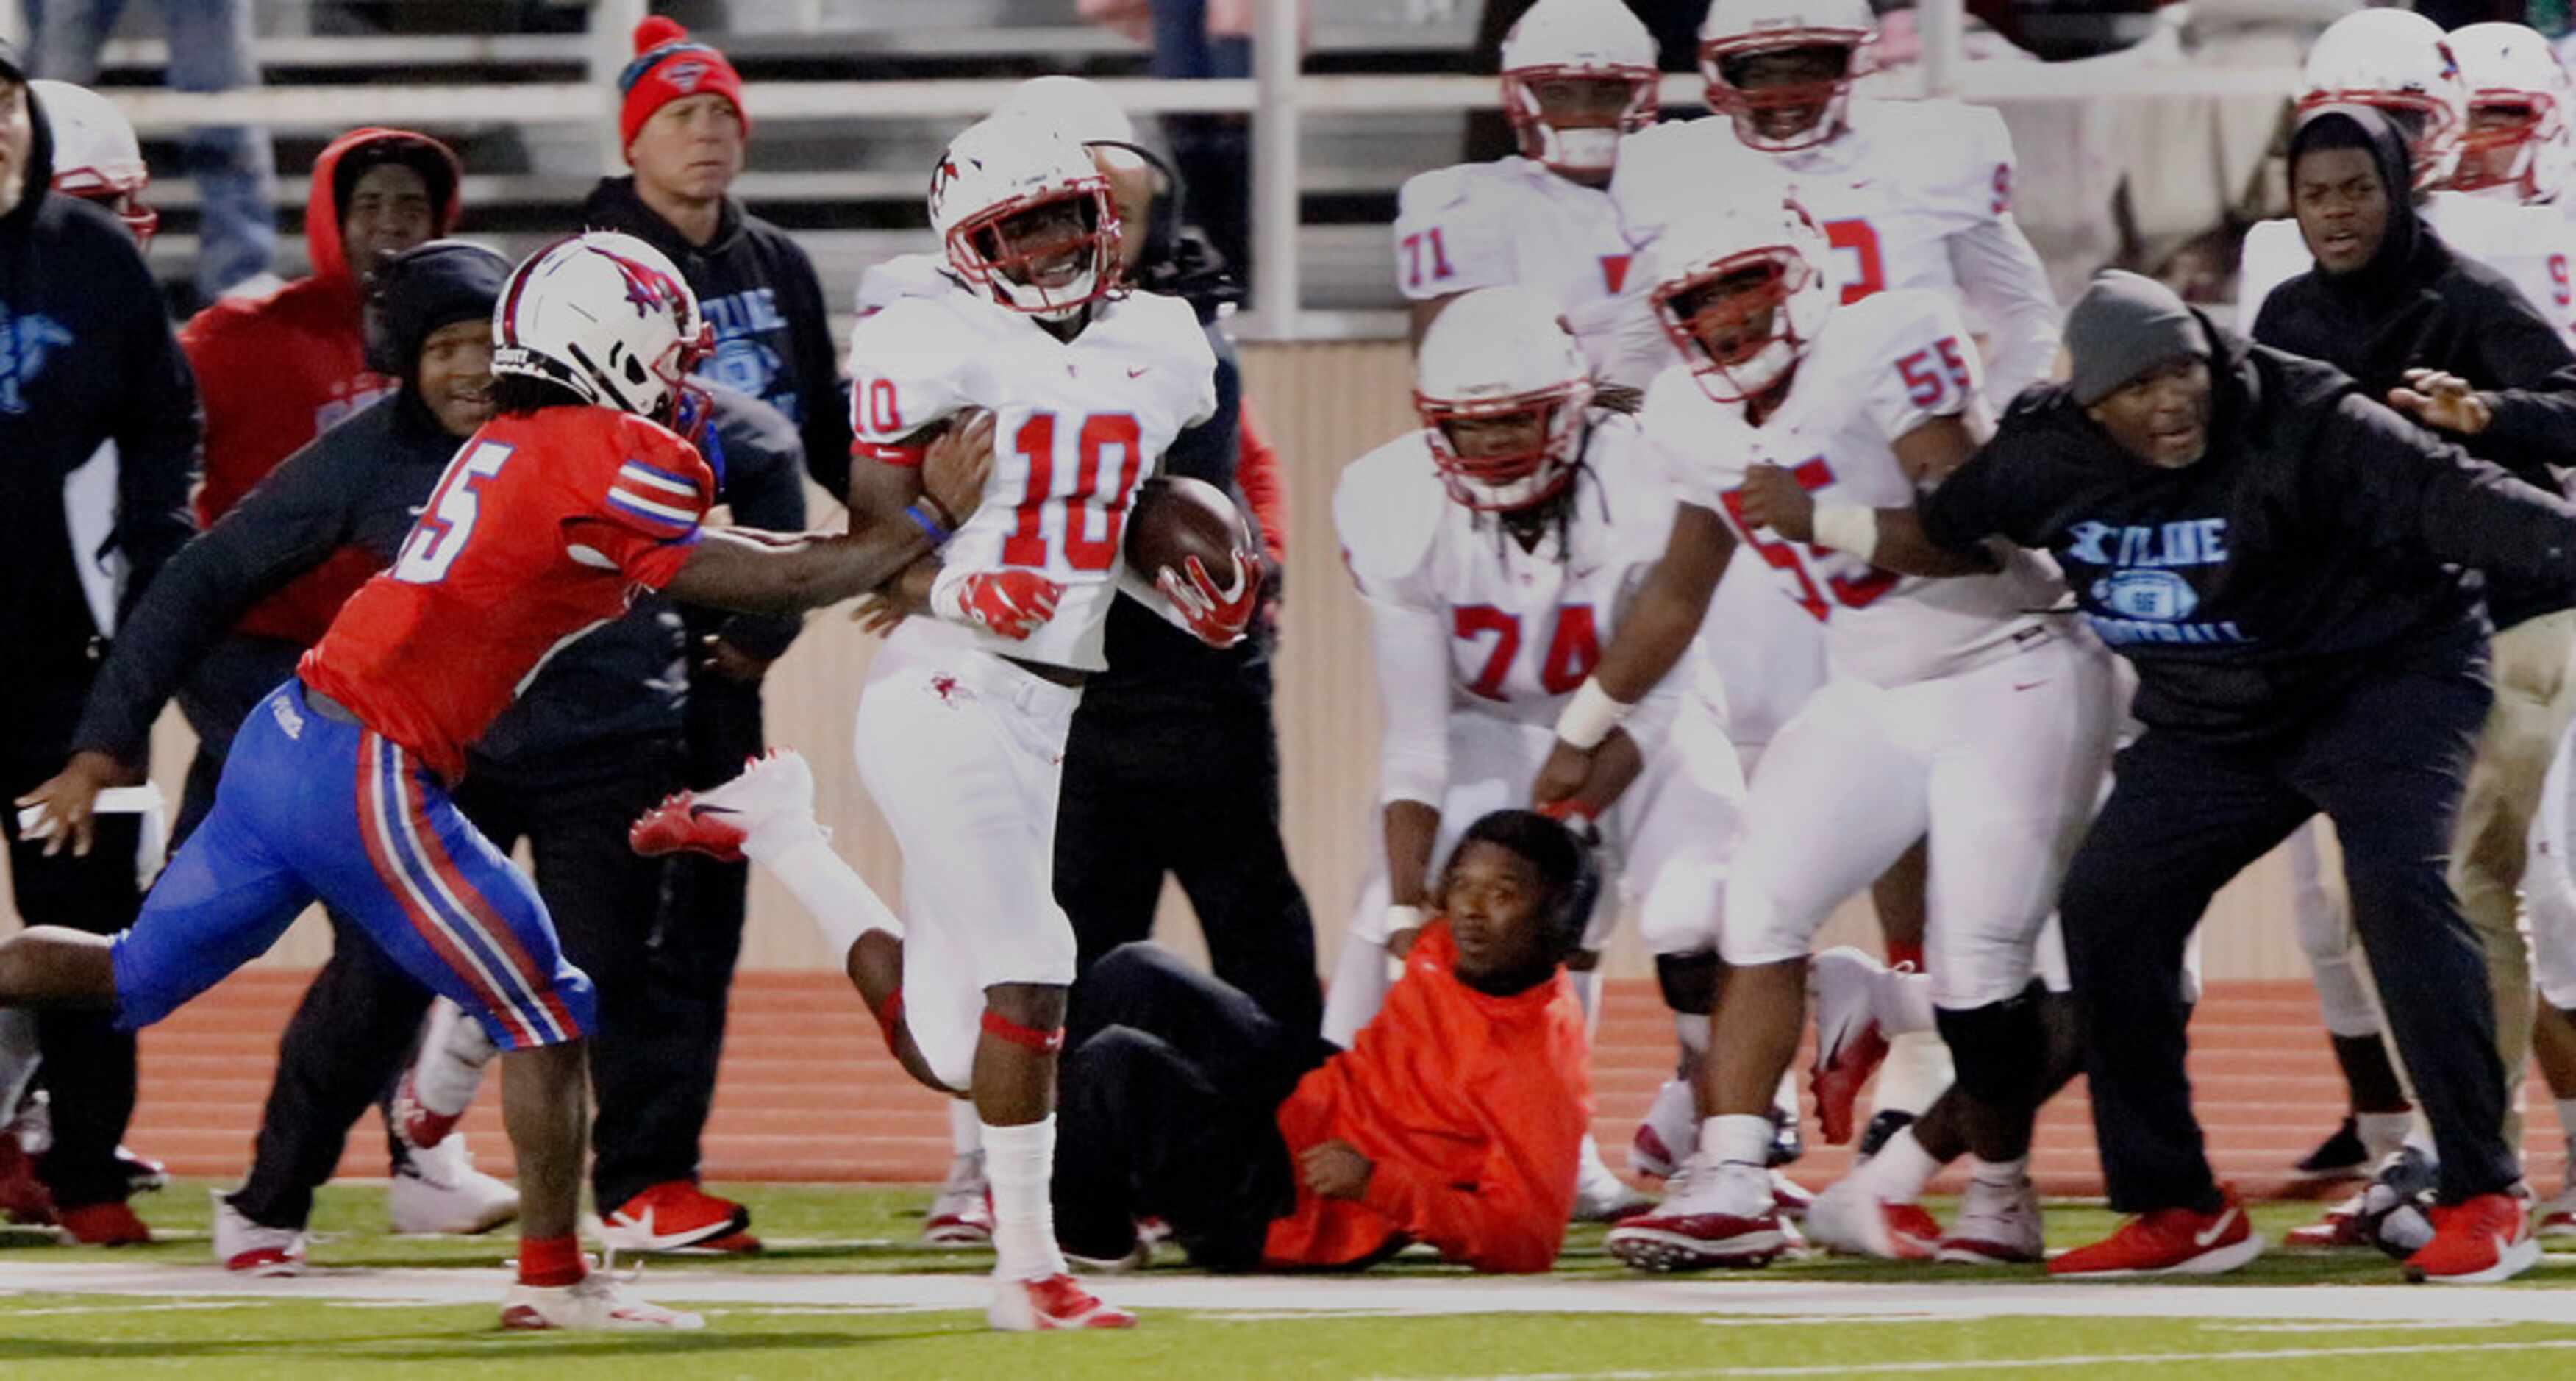 Skyline High School cornerback Milton Roundtree (10) is shoved out of bounds by J.J. Pearce...